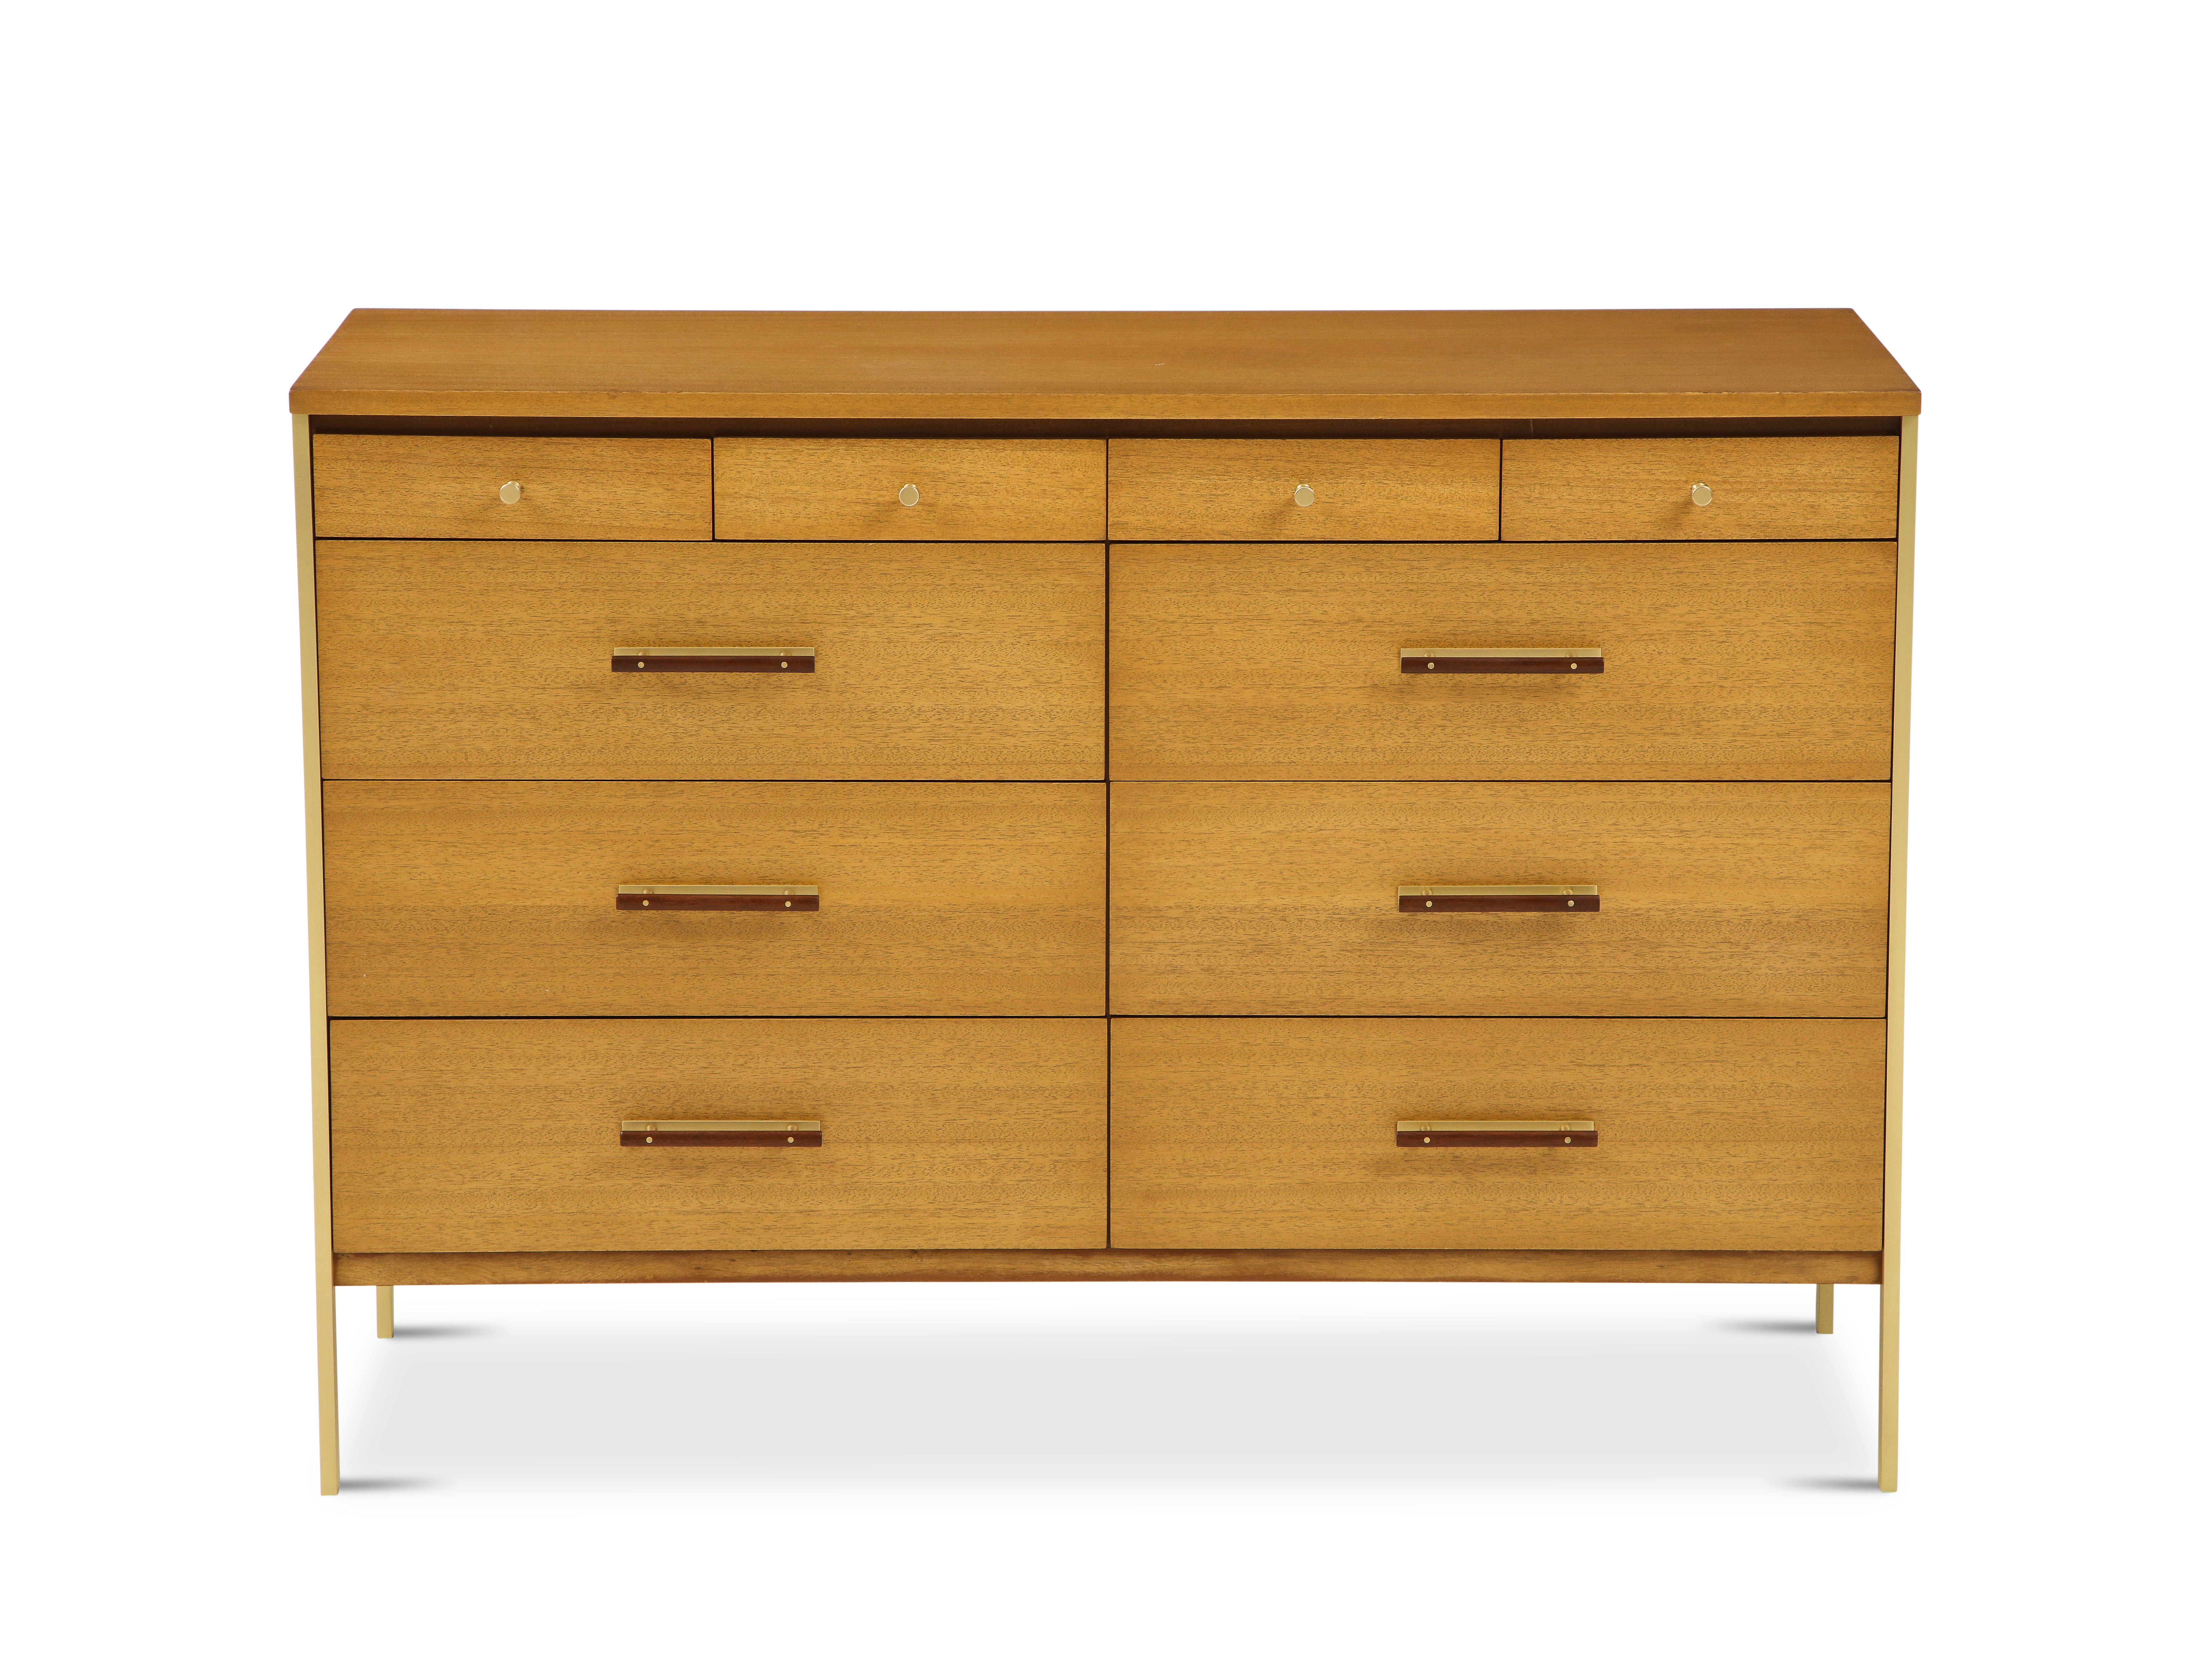  Pair of Mid-Century Modern chests. Paul McCobb for Directional